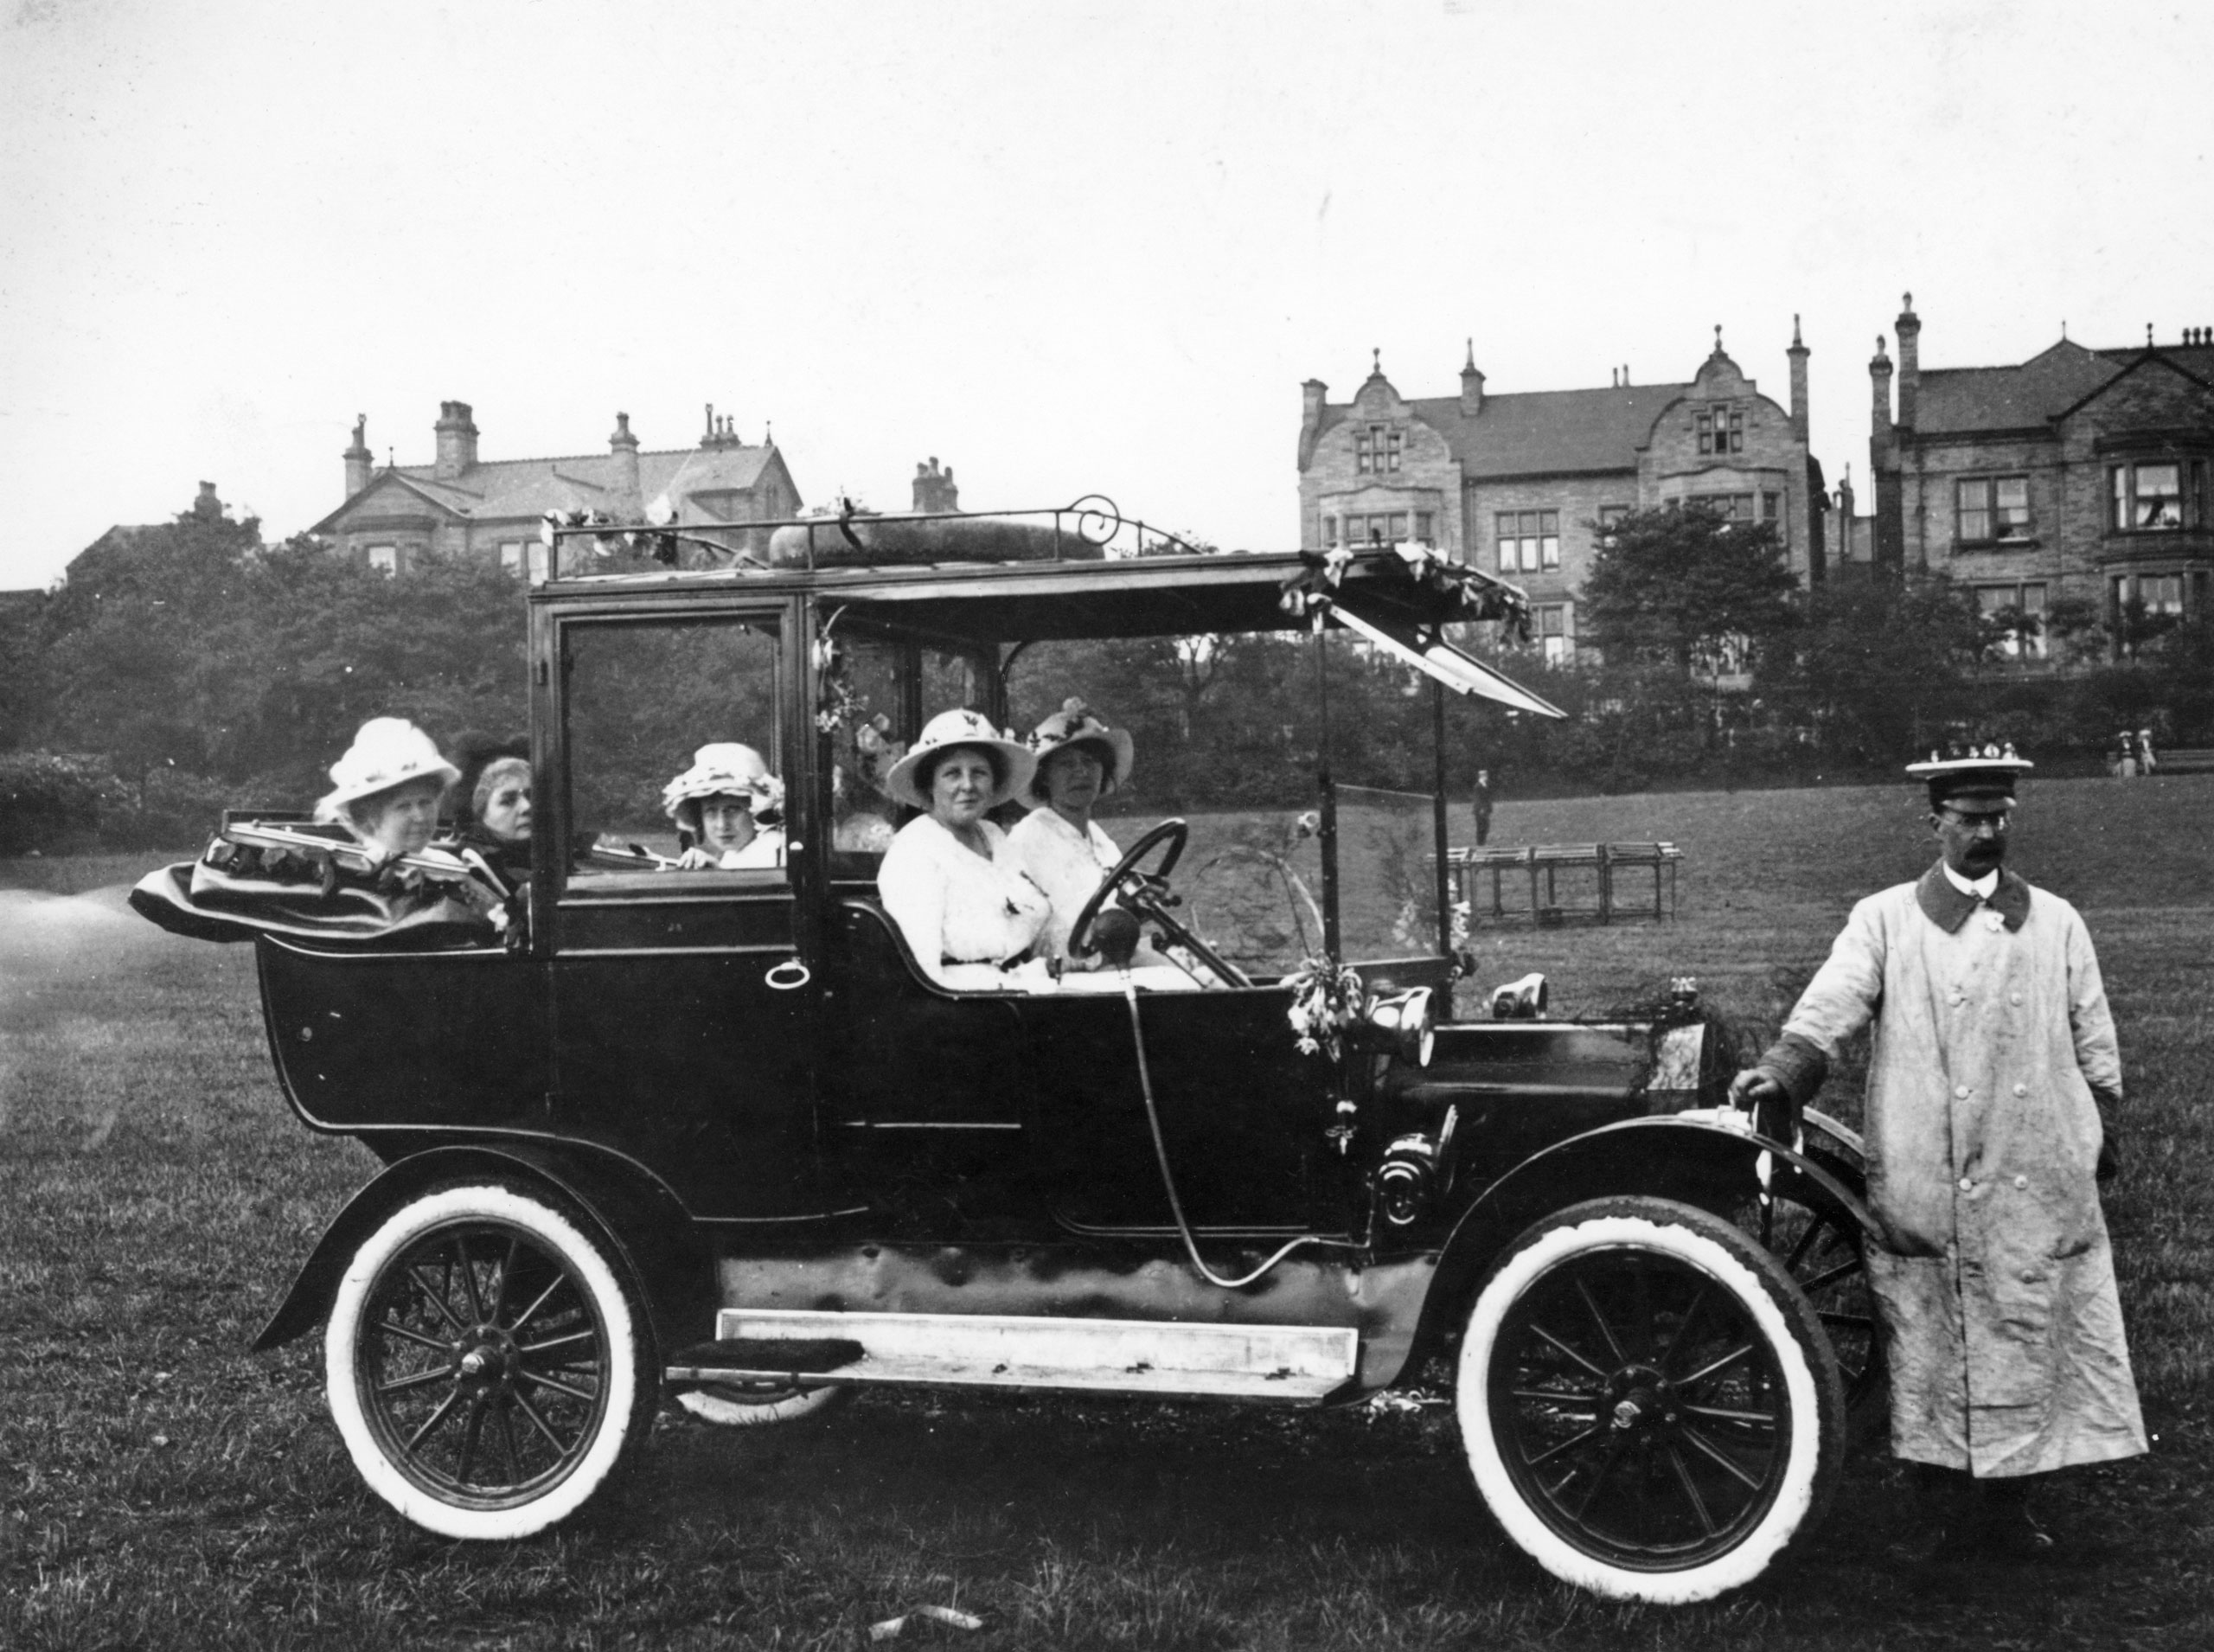 Ladies in a Model T Ford in 1914. Their chauffeur is standing in front of the car.